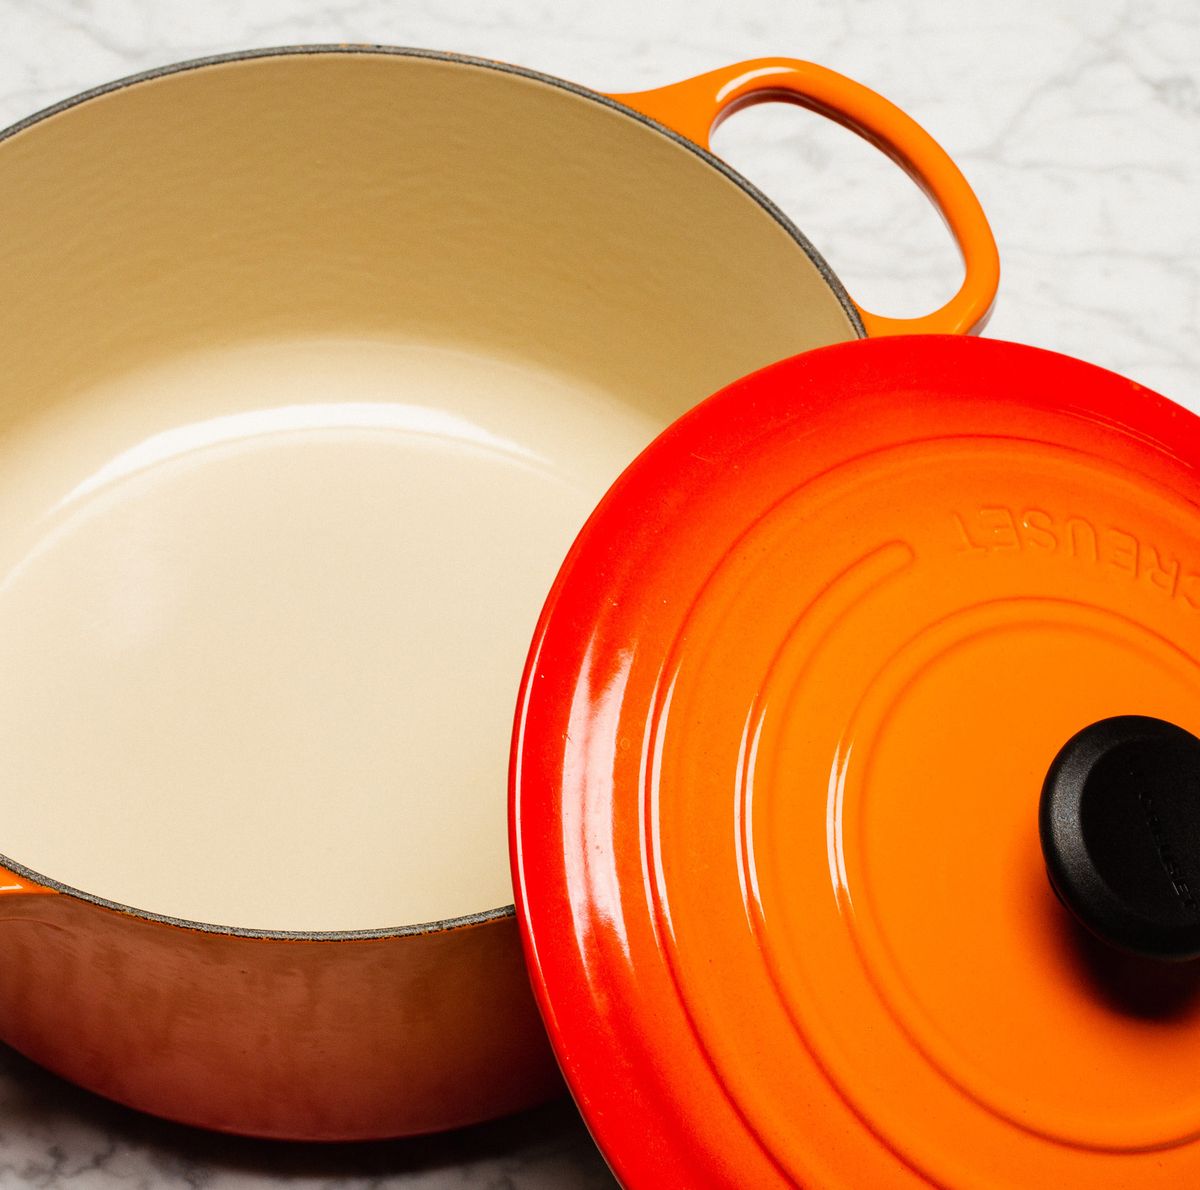 Le Creuset Dutch Ovens: What About the Iconic Cookware